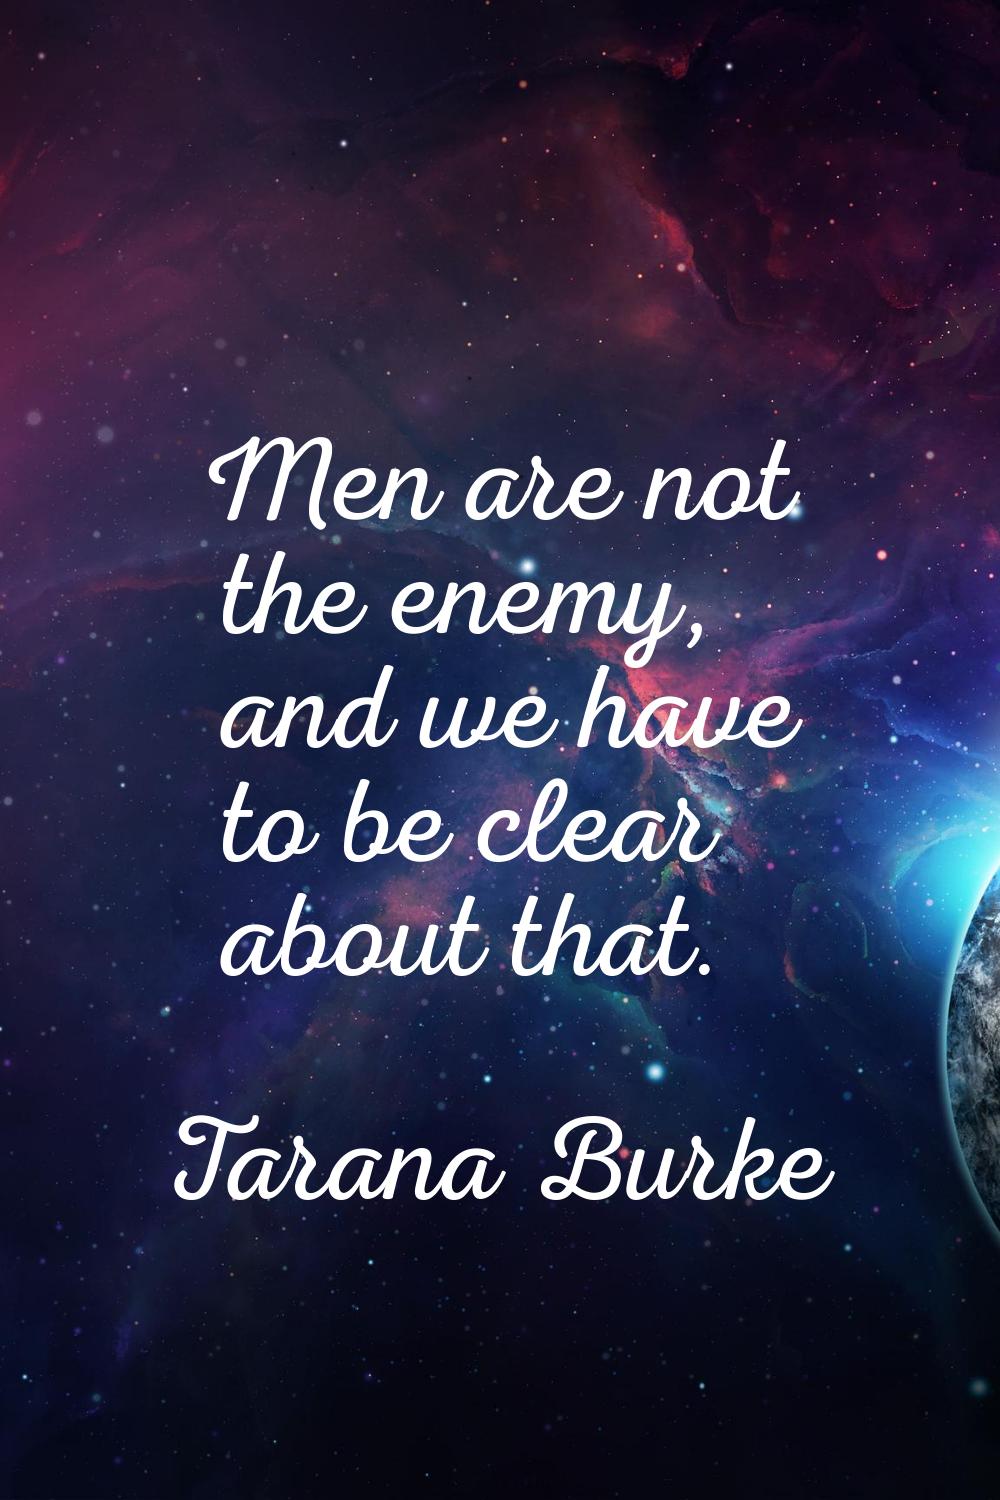 Men are not the enemy, and we have to be clear about that.